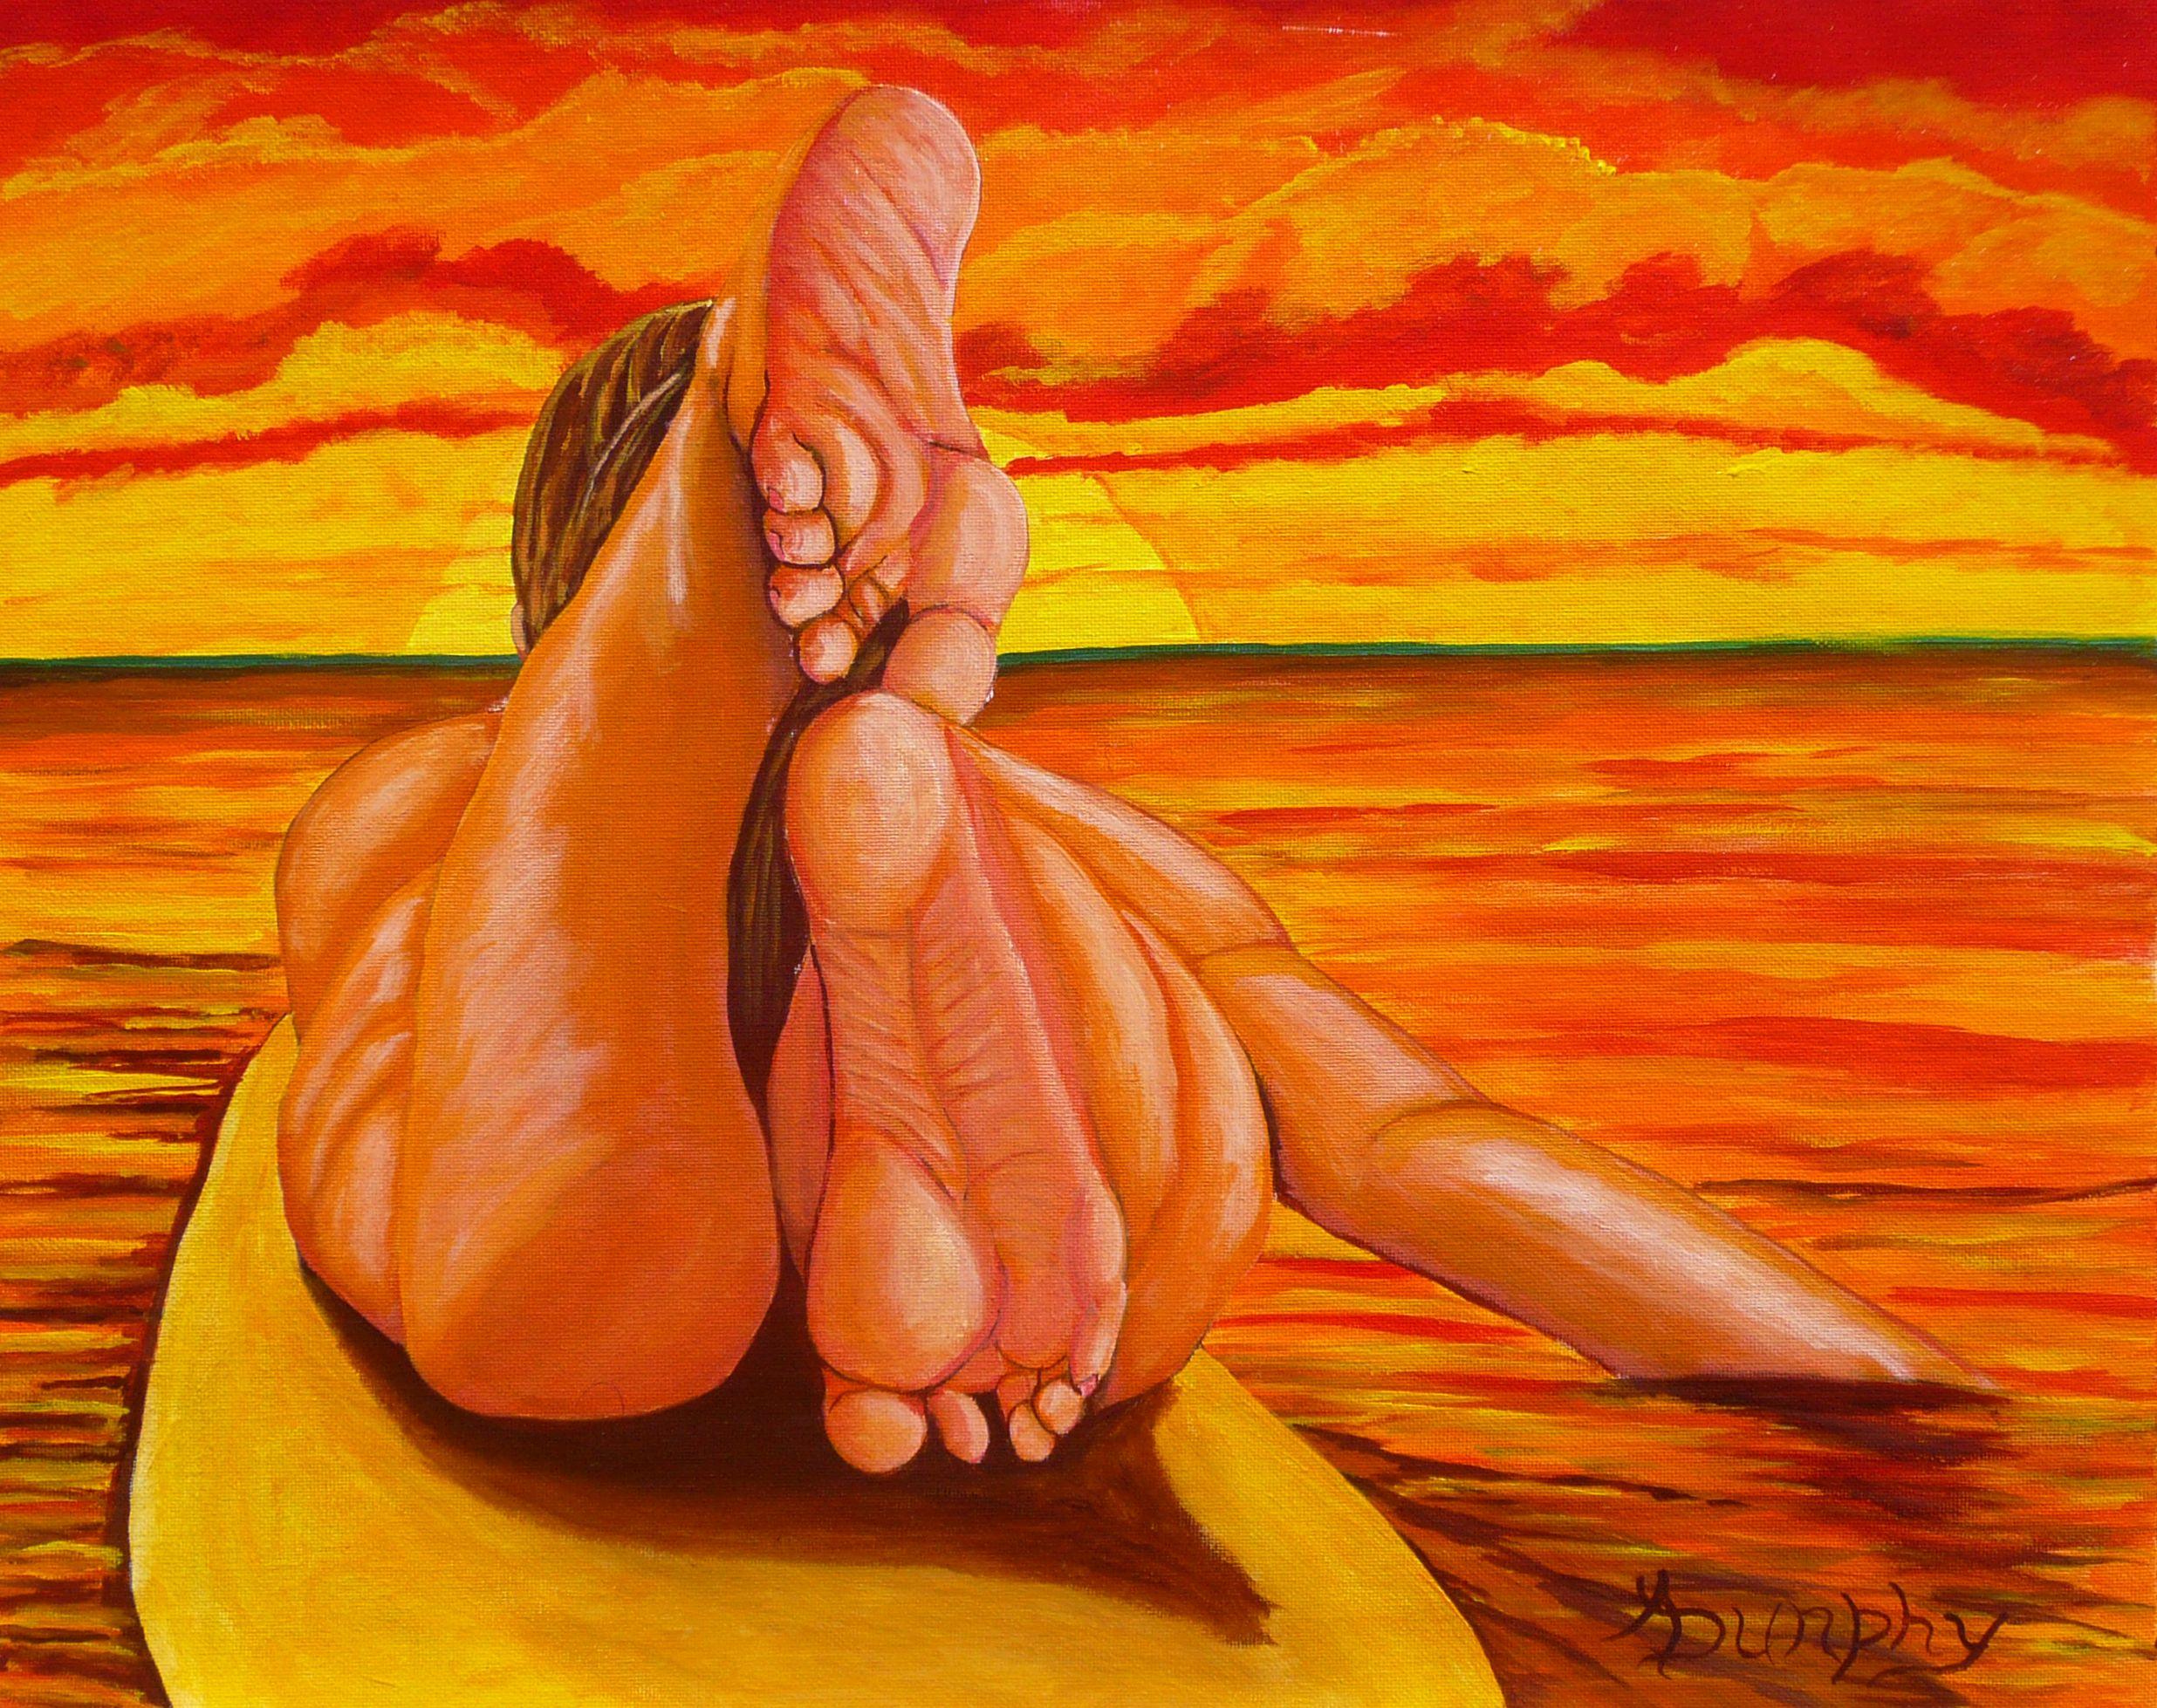 This young surfer girl is laying on her board and enjoying the relaxation of being alone at sea and watching the setting sun. This painting has been created using professional grade acrylics on canvas. The size of this piece is 16X20 inches or 40X50